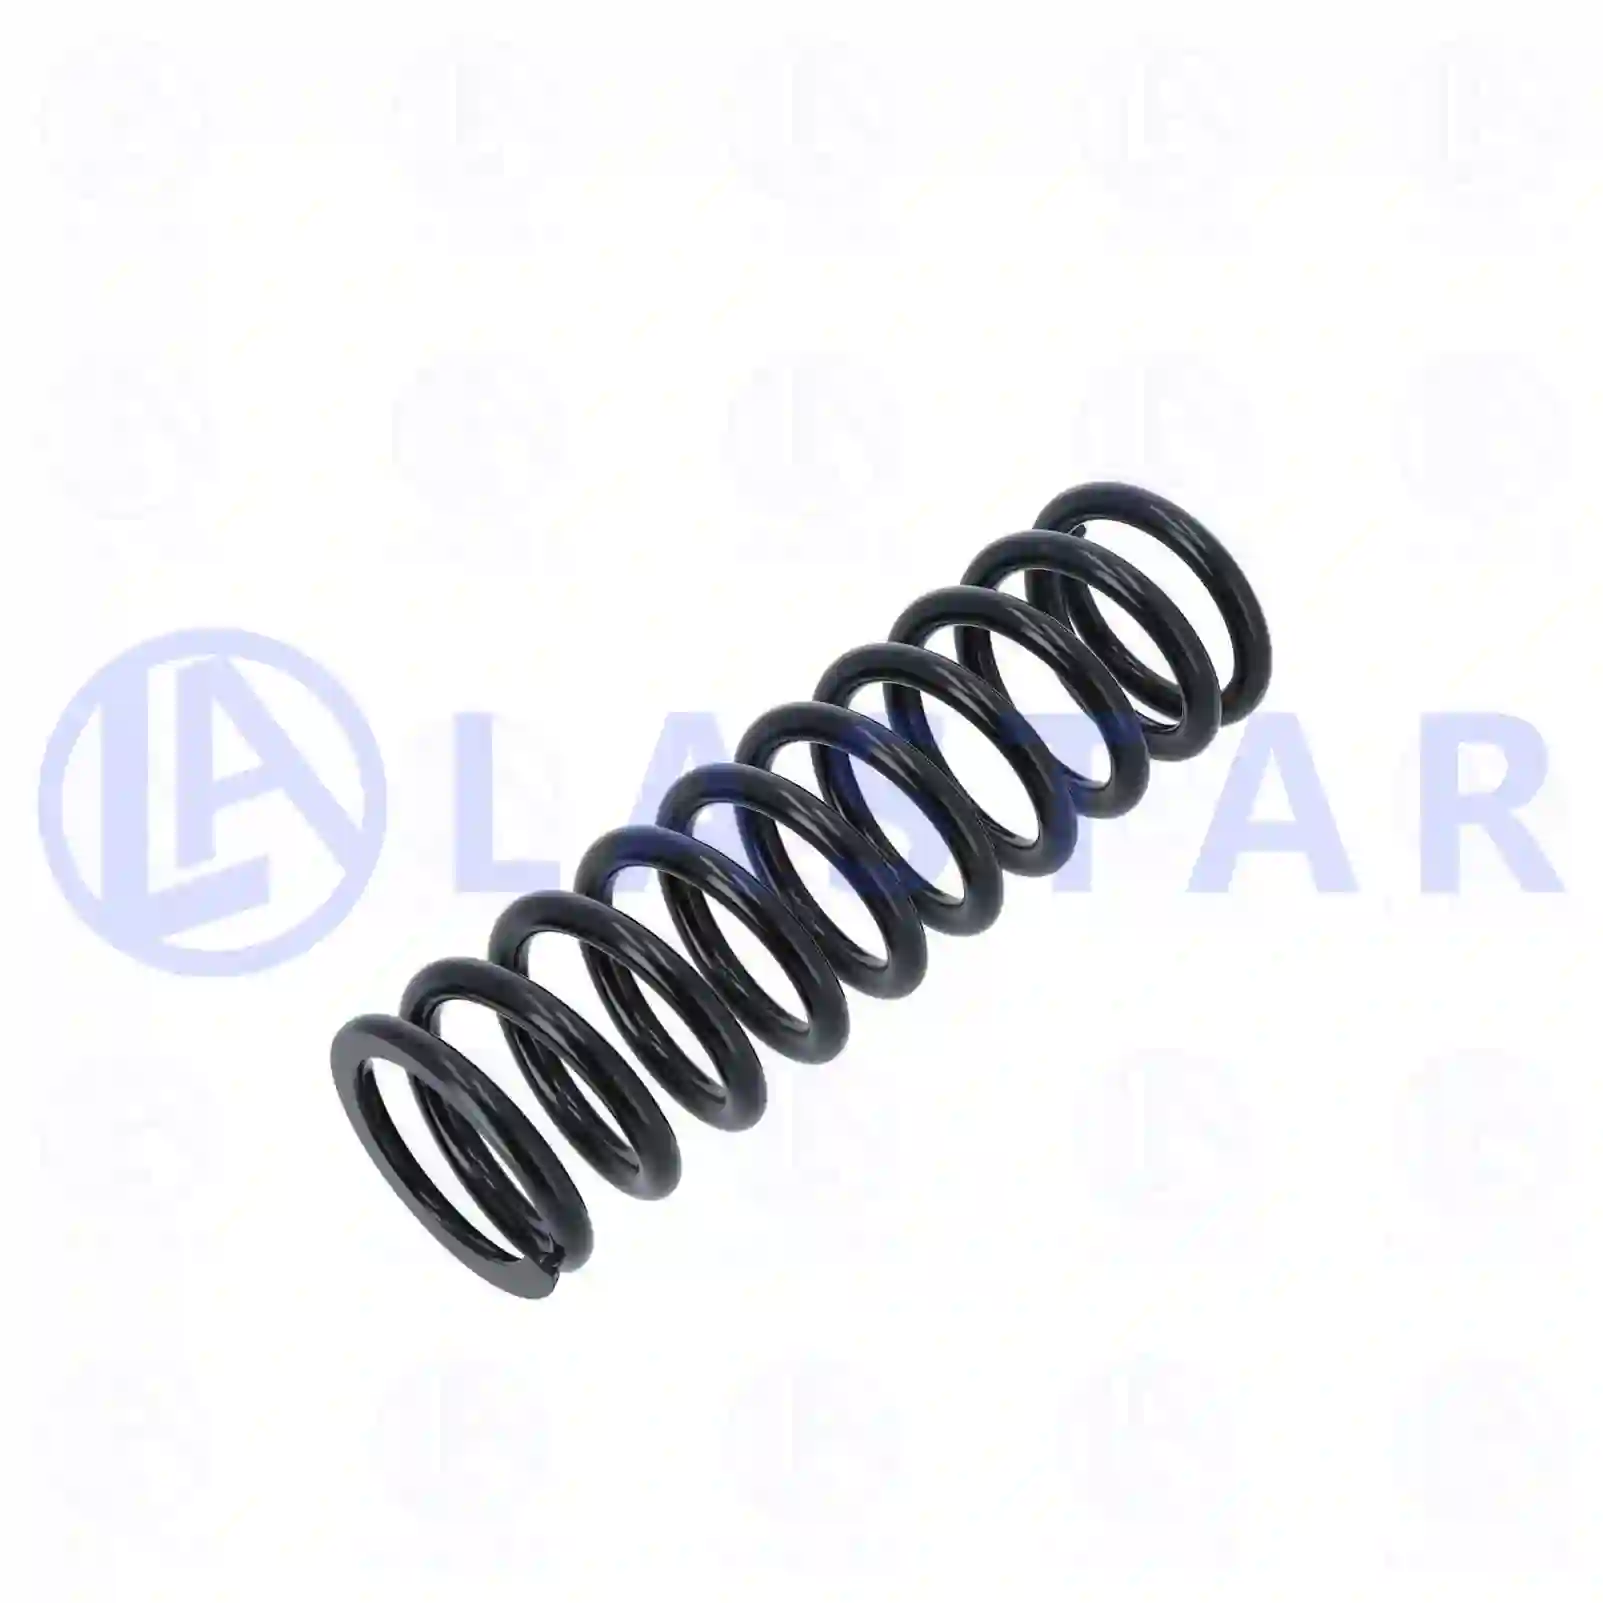 Spring, cabin shock absorber, 77735773, 1075358 ||  77735773 Lastar Spare Part | Truck Spare Parts, Auotomotive Spare Parts Spring, cabin shock absorber, 77735773, 1075358 ||  77735773 Lastar Spare Part | Truck Spare Parts, Auotomotive Spare Parts